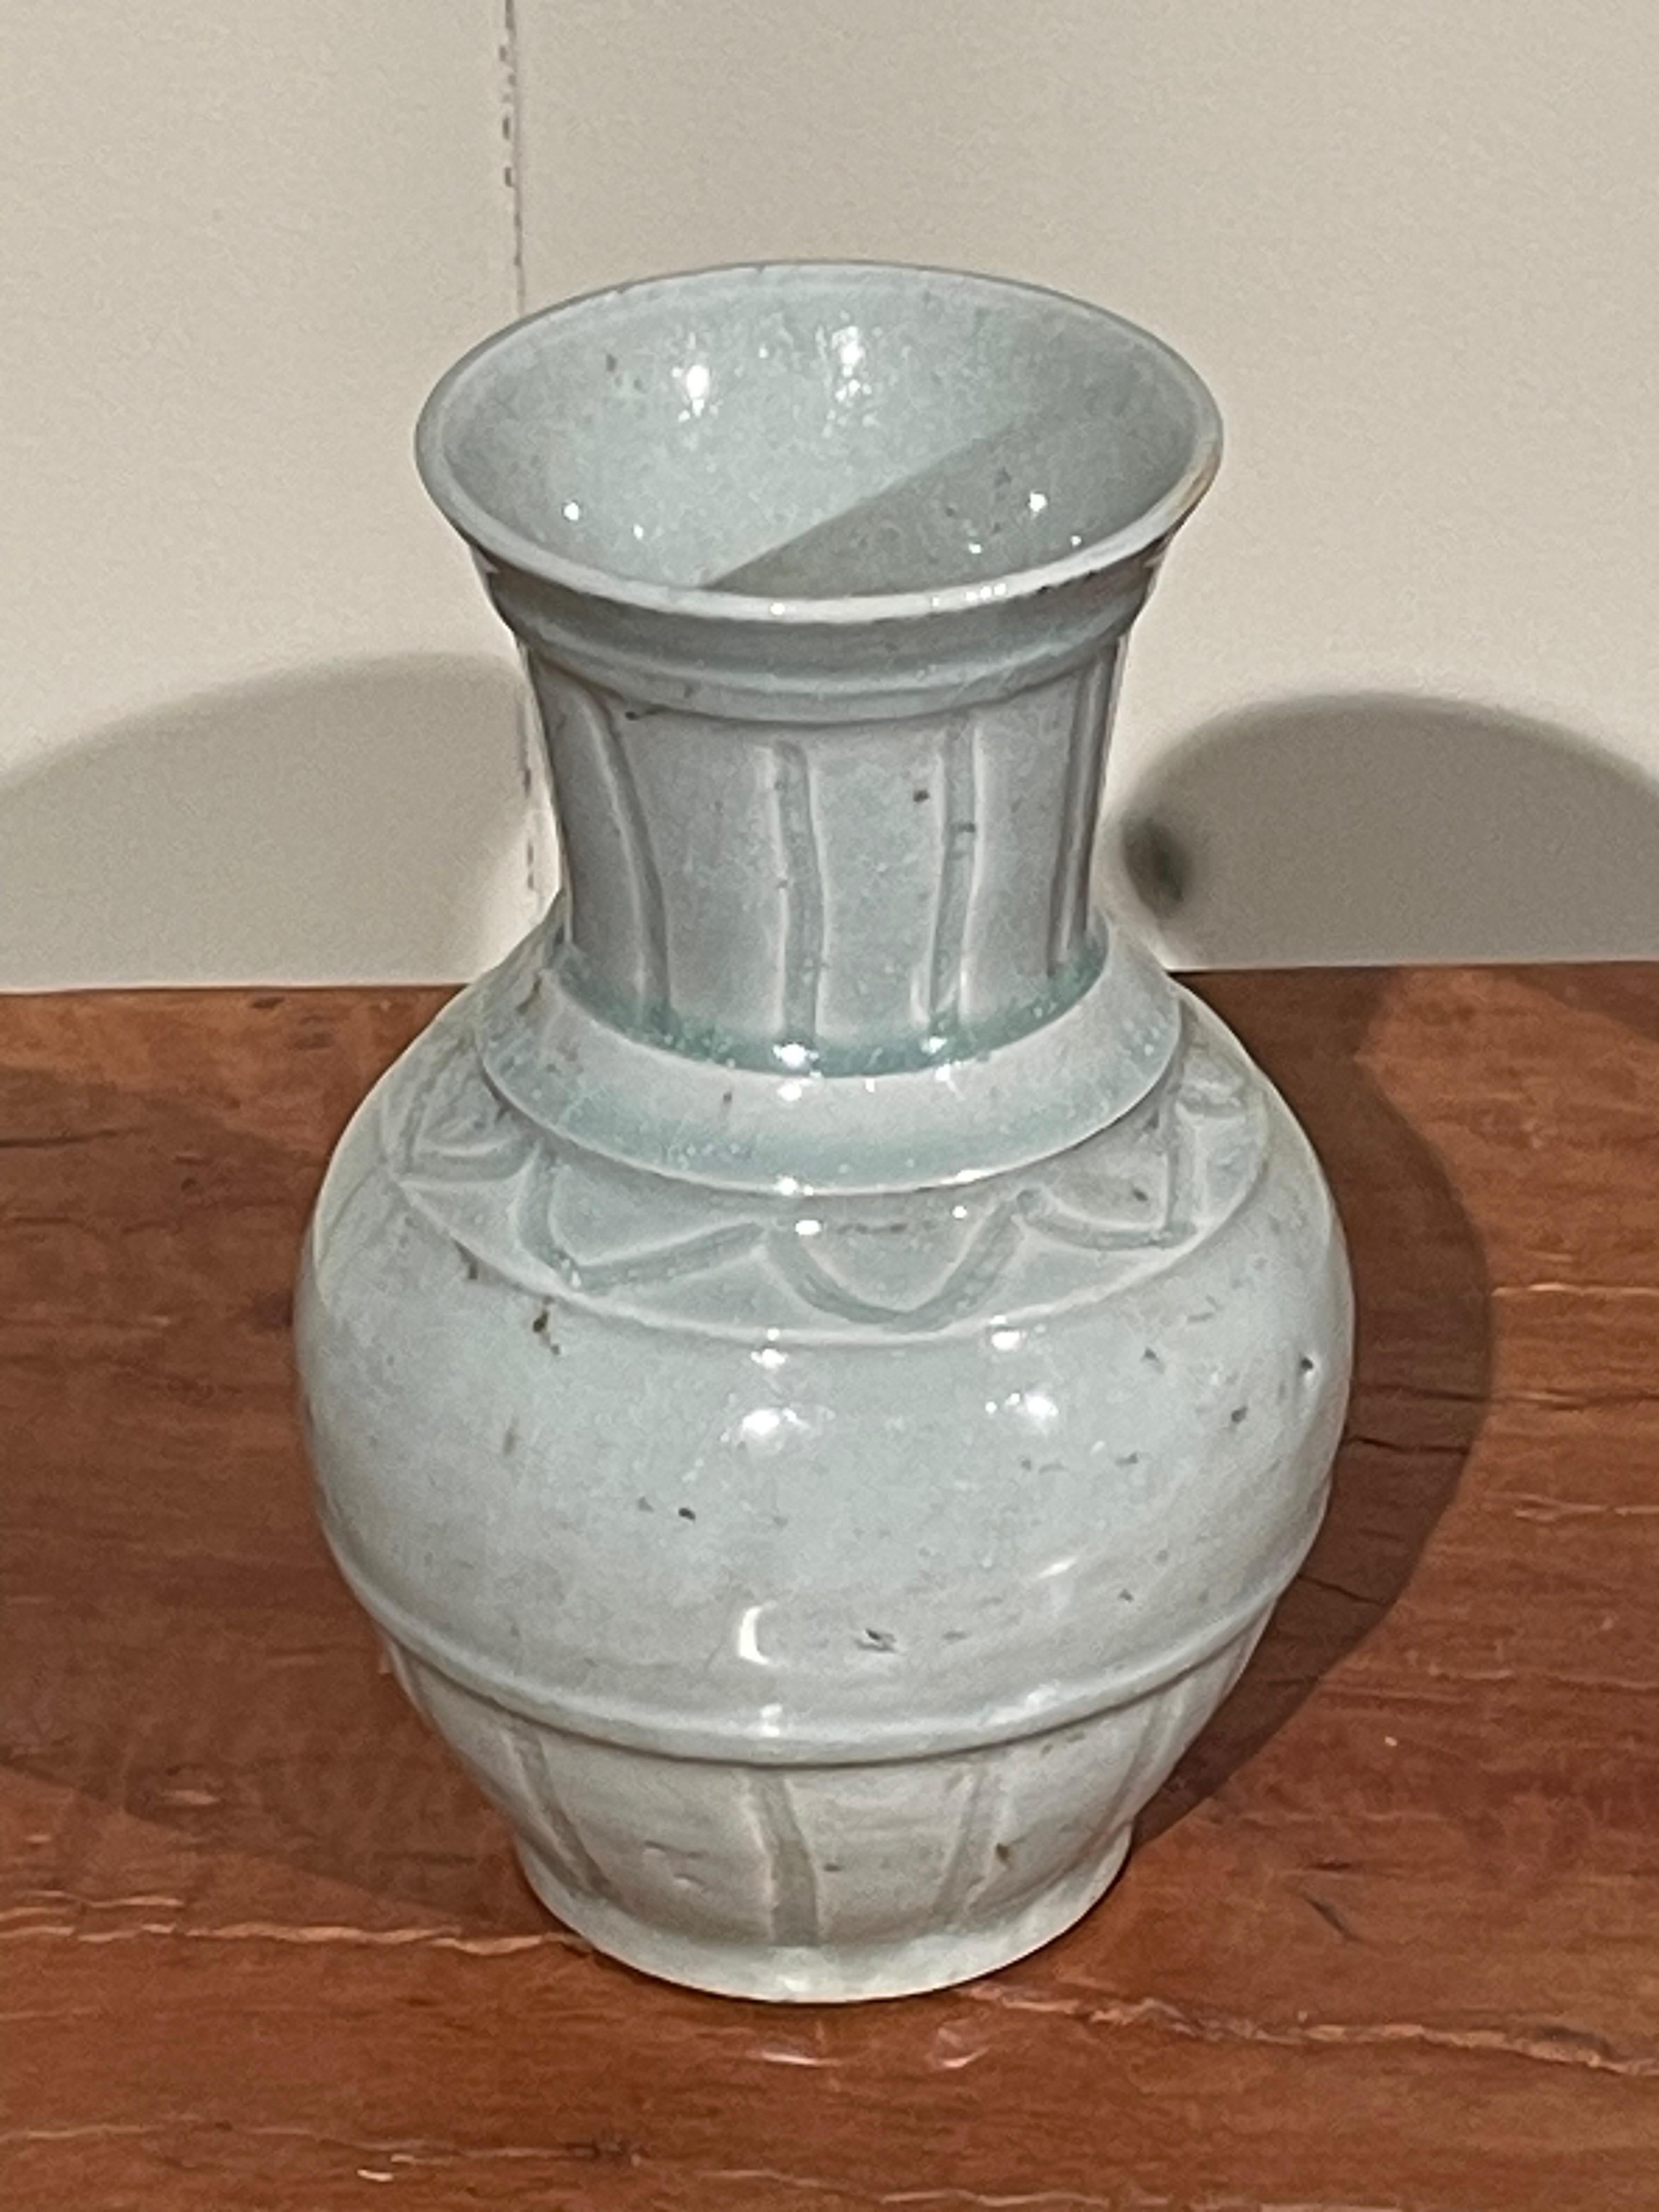 Contemporary Chinese pale turquoise vase.
Vertical rib details.
From a collection of three pieces.
ARRIVING APRIL